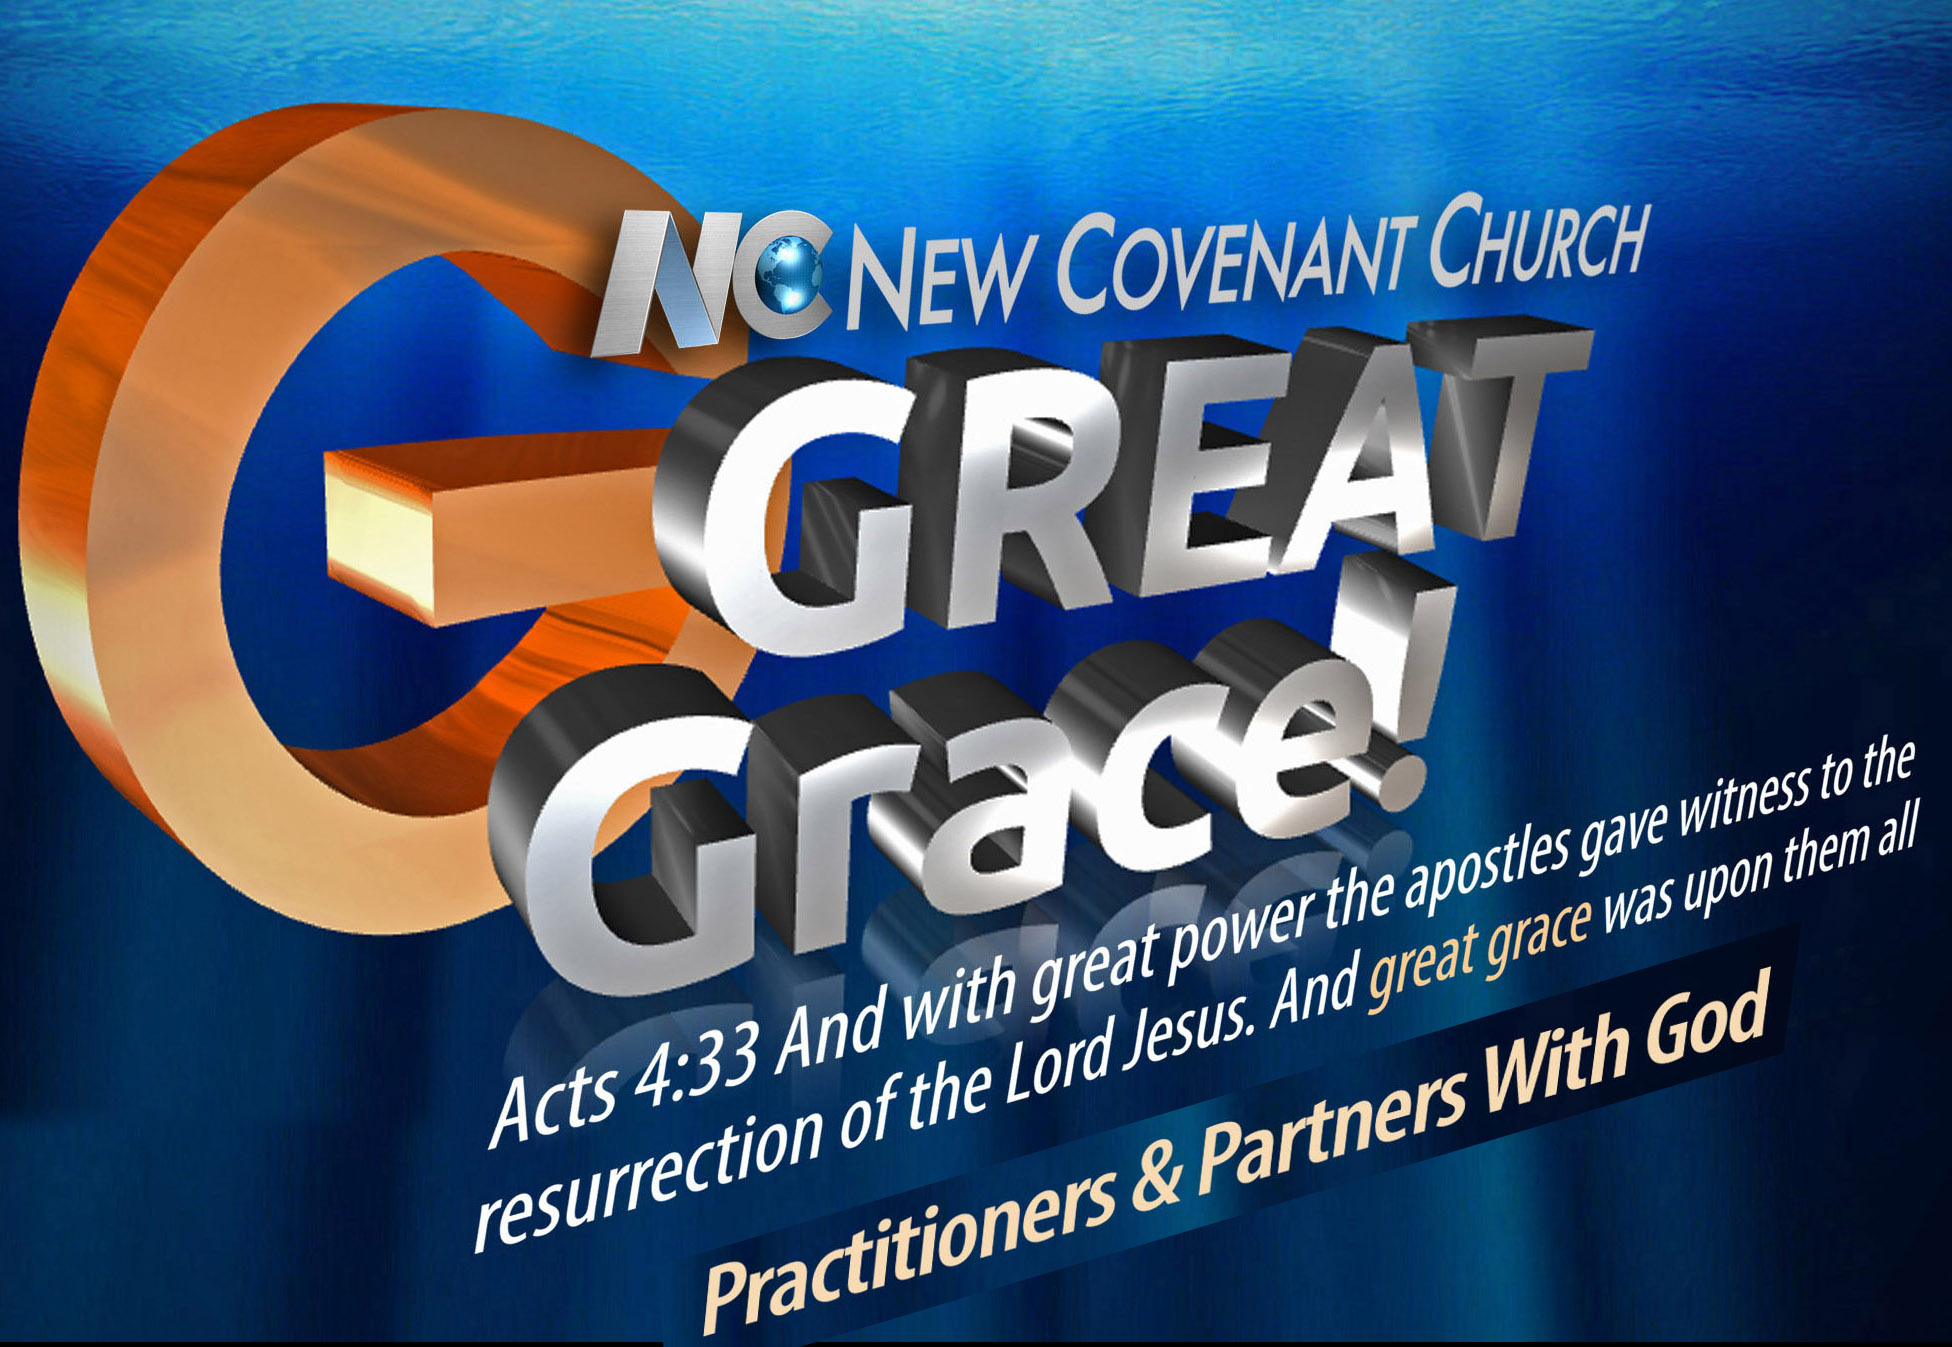 Great Grace: Practitioners & Partners With God